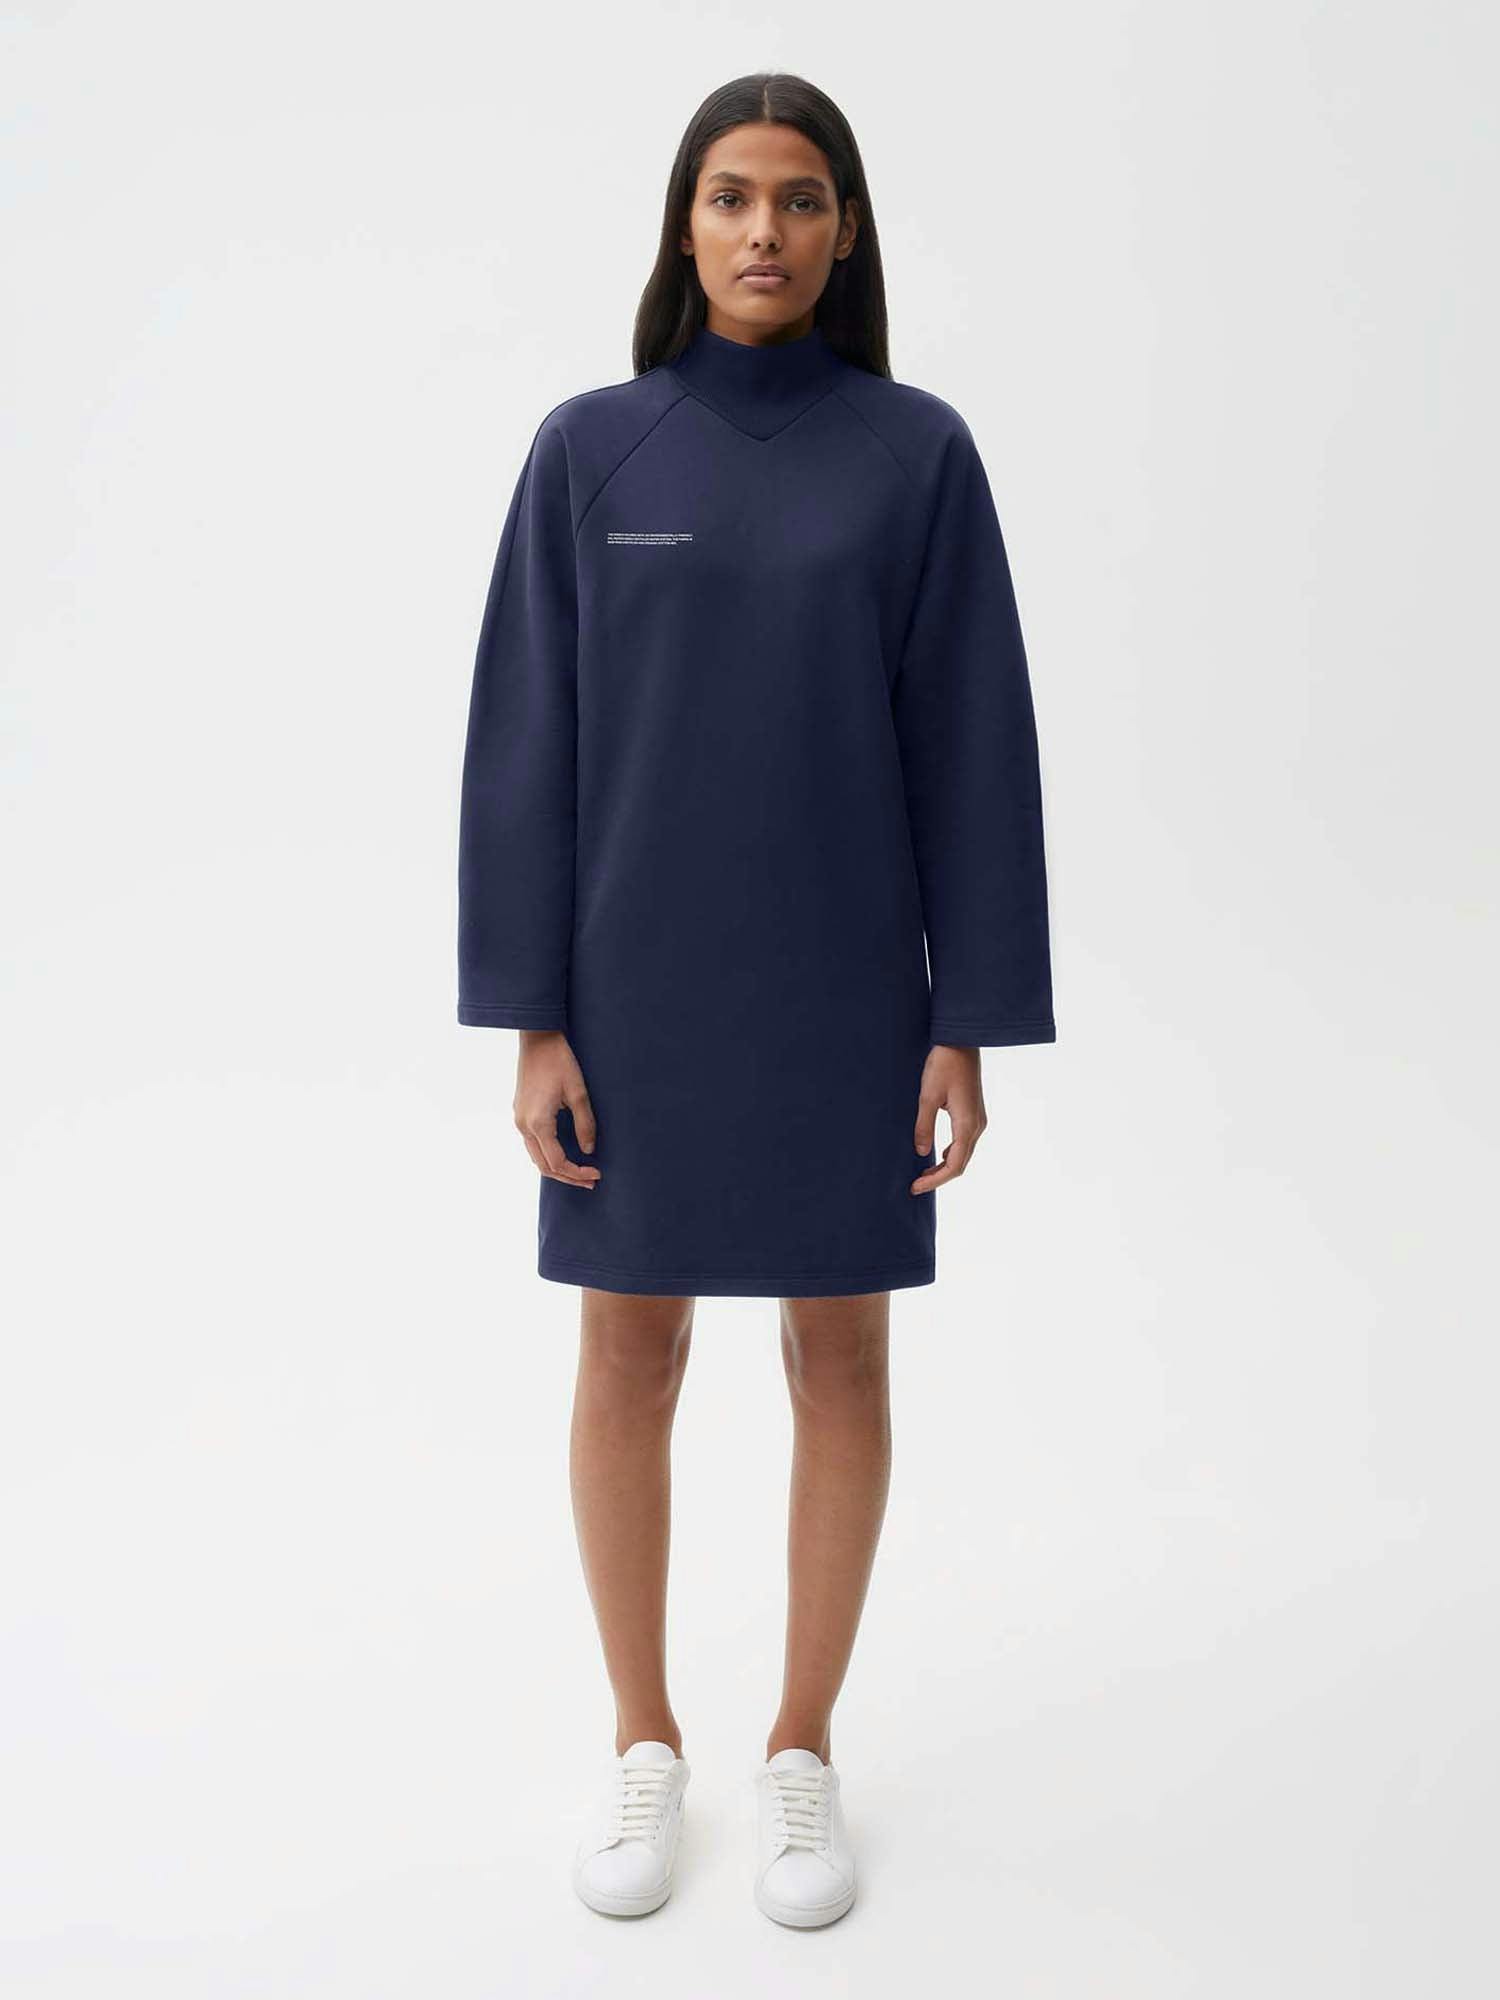 https://cdn.shopify.com/s/files/1/0035/1309/0115/products/Womens-Heavyweight-Recycled-Cotton-Funnel-Neck-Dress-Navy_1.jpg?v=1671123677